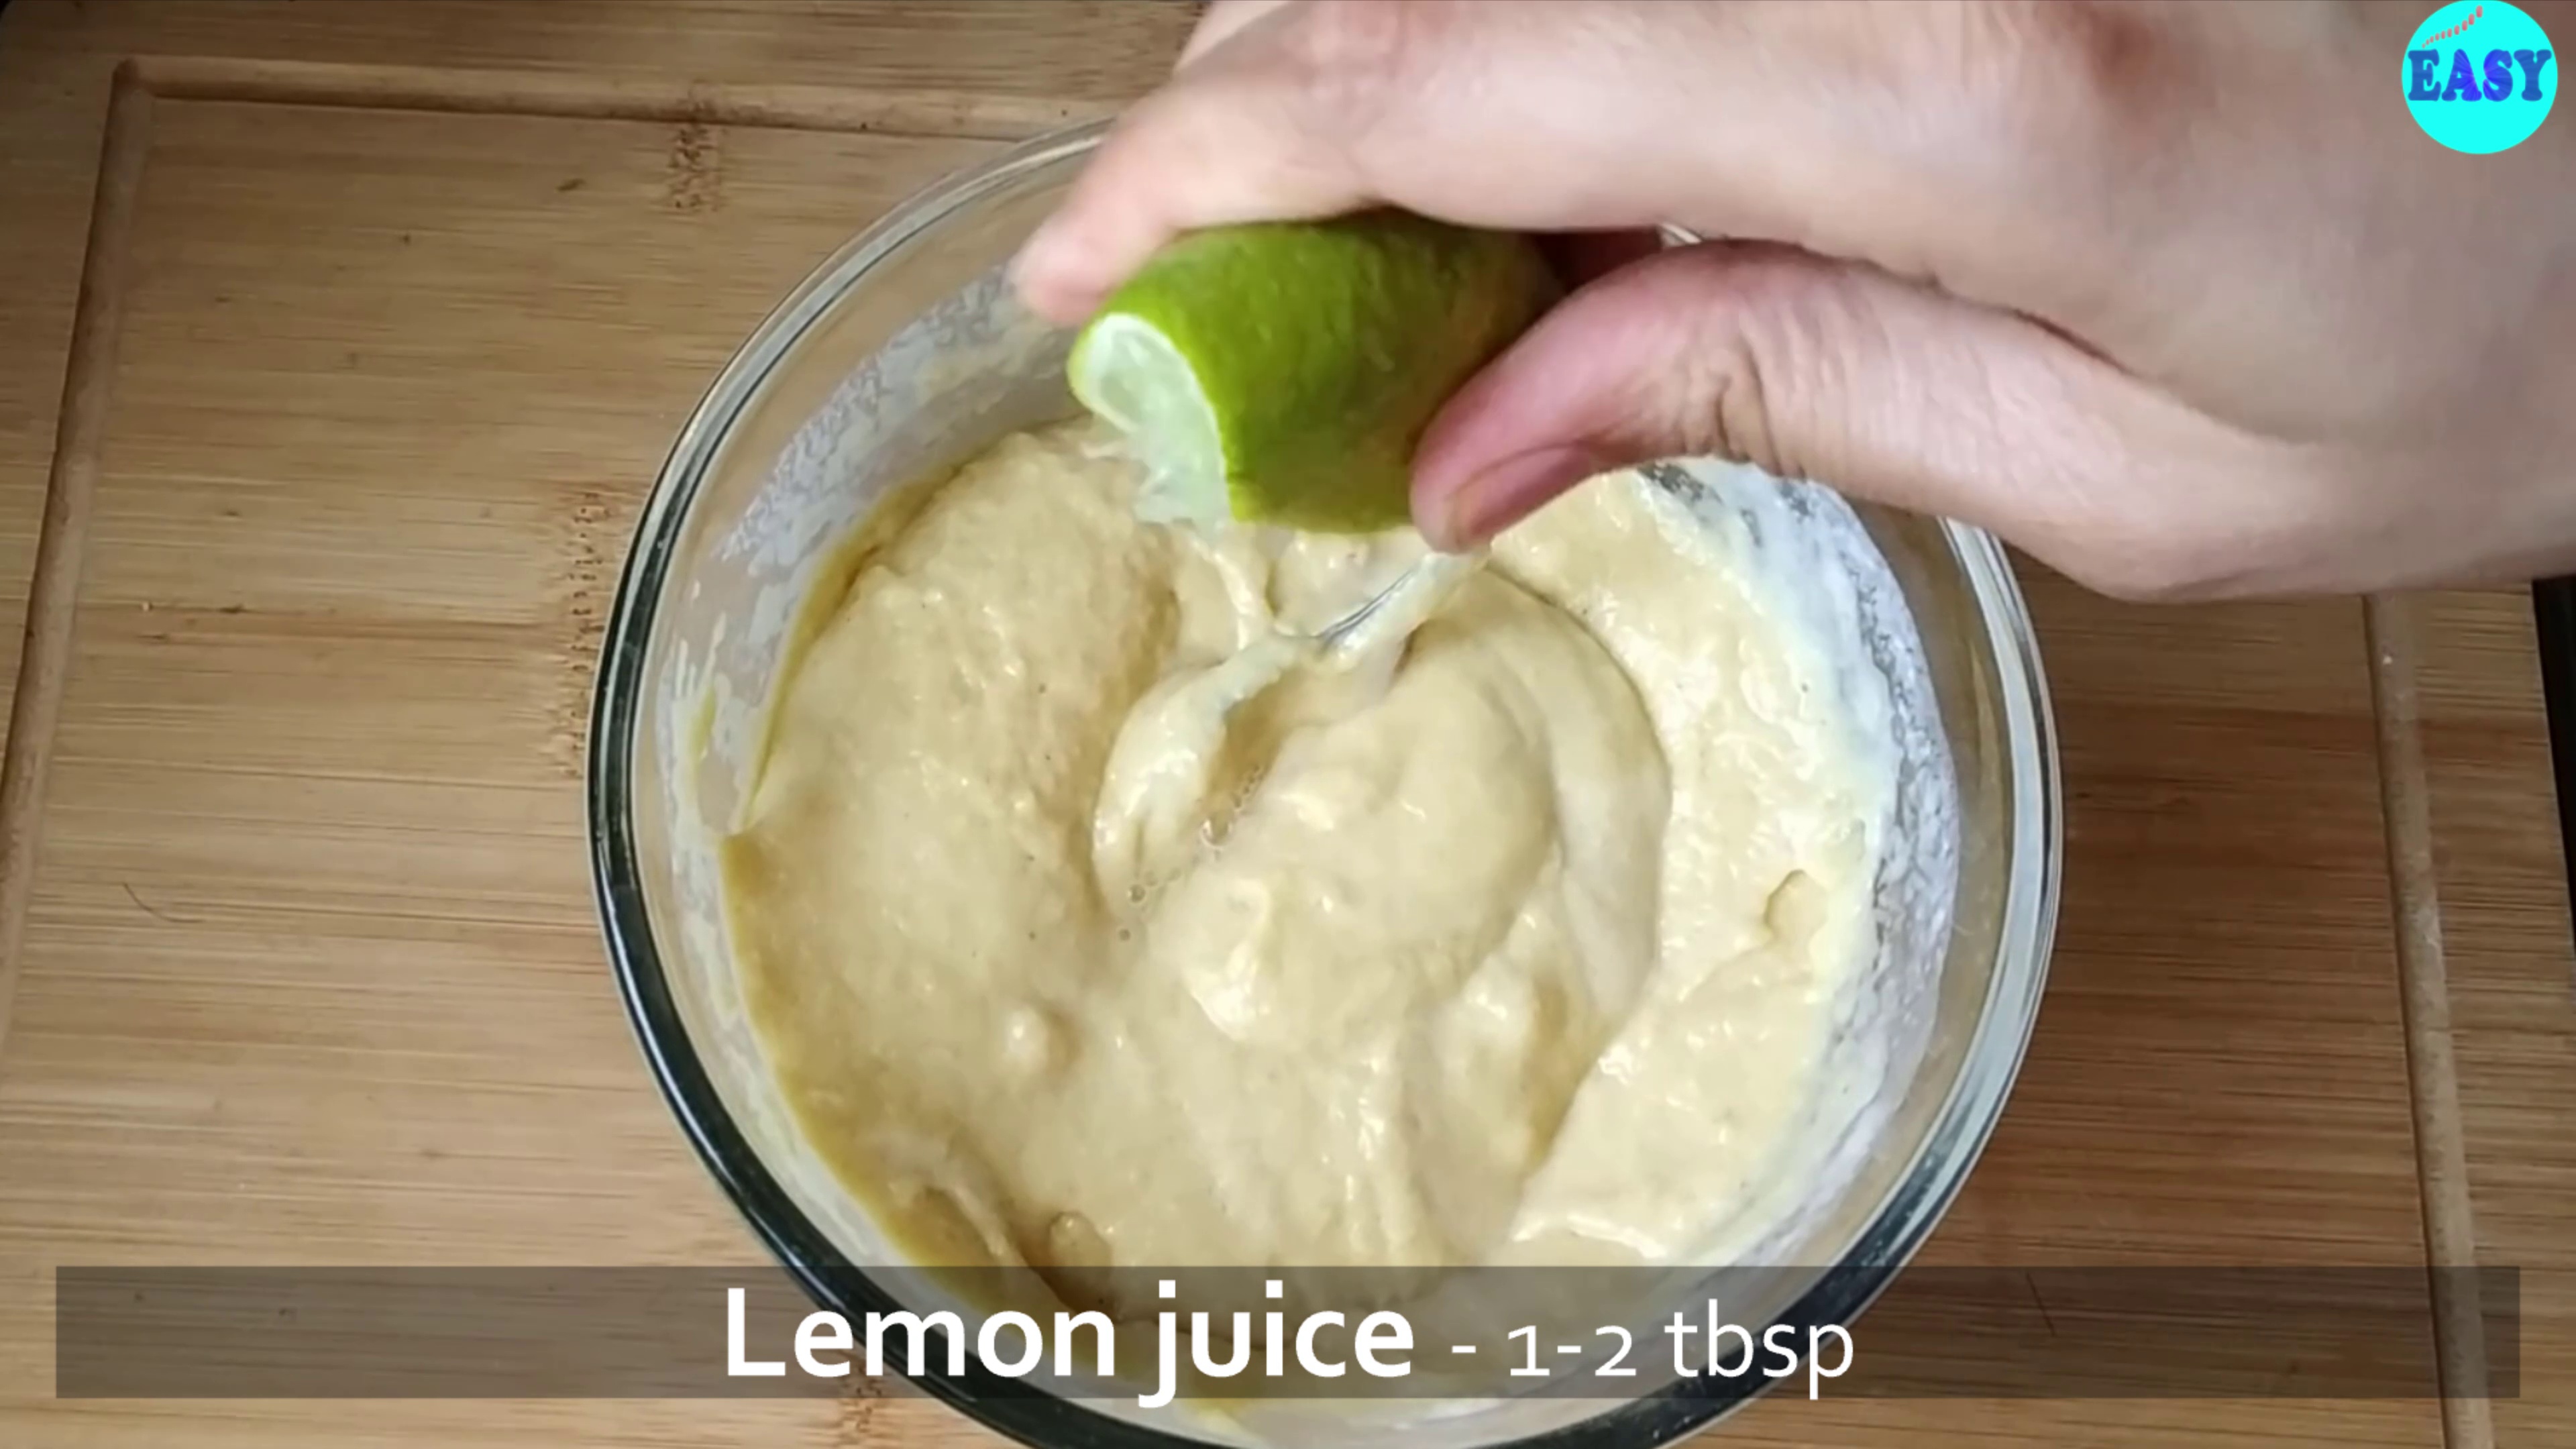 Step 6 - Lastly add lemon juice and mix everything well.